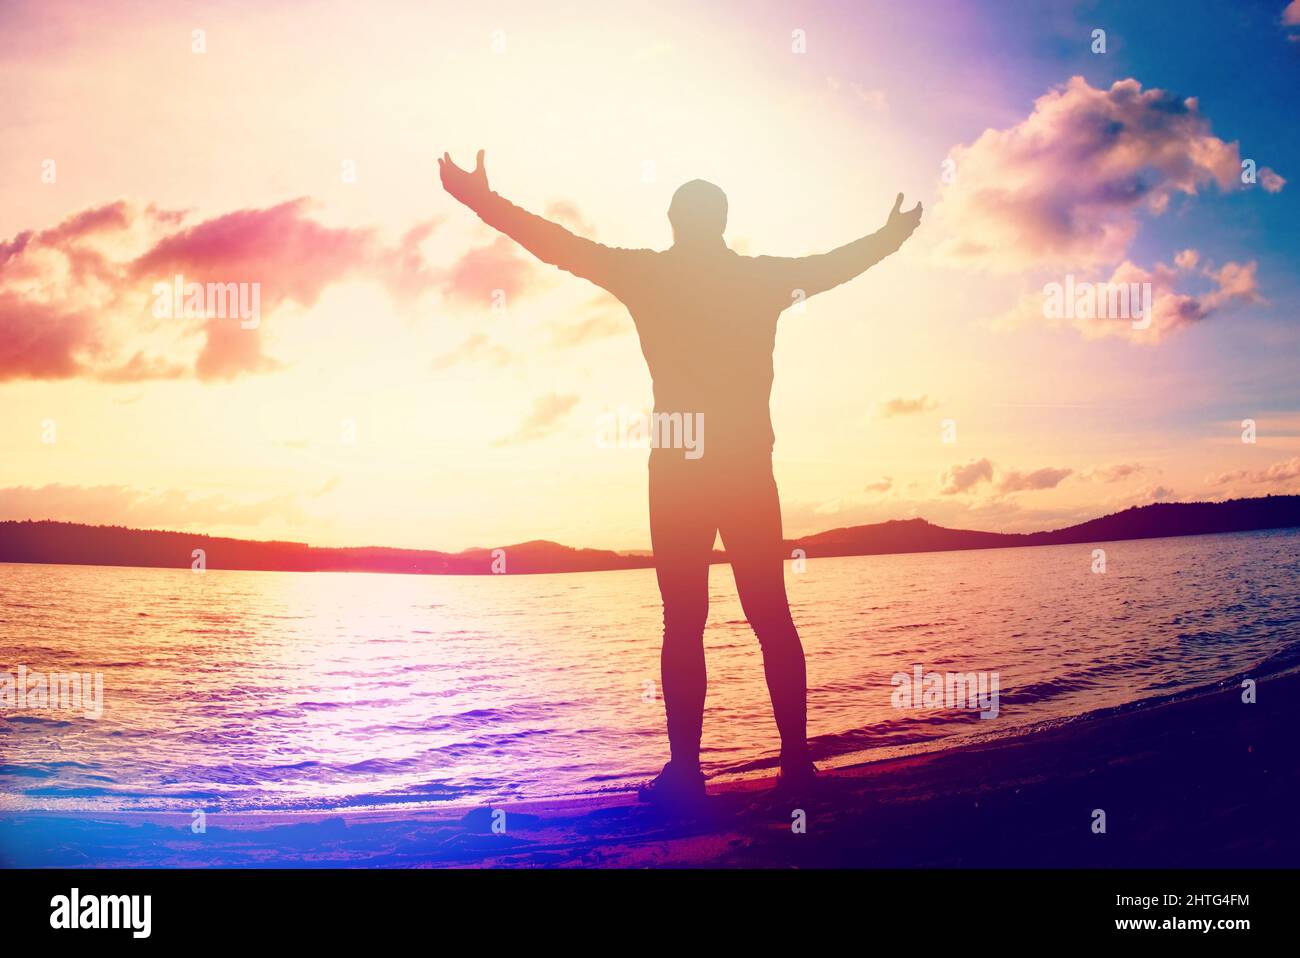 Man raising arms on sea shore. Happy man rised hands above head on beach.  Abstract lighting, colorful flare. Stock Photo